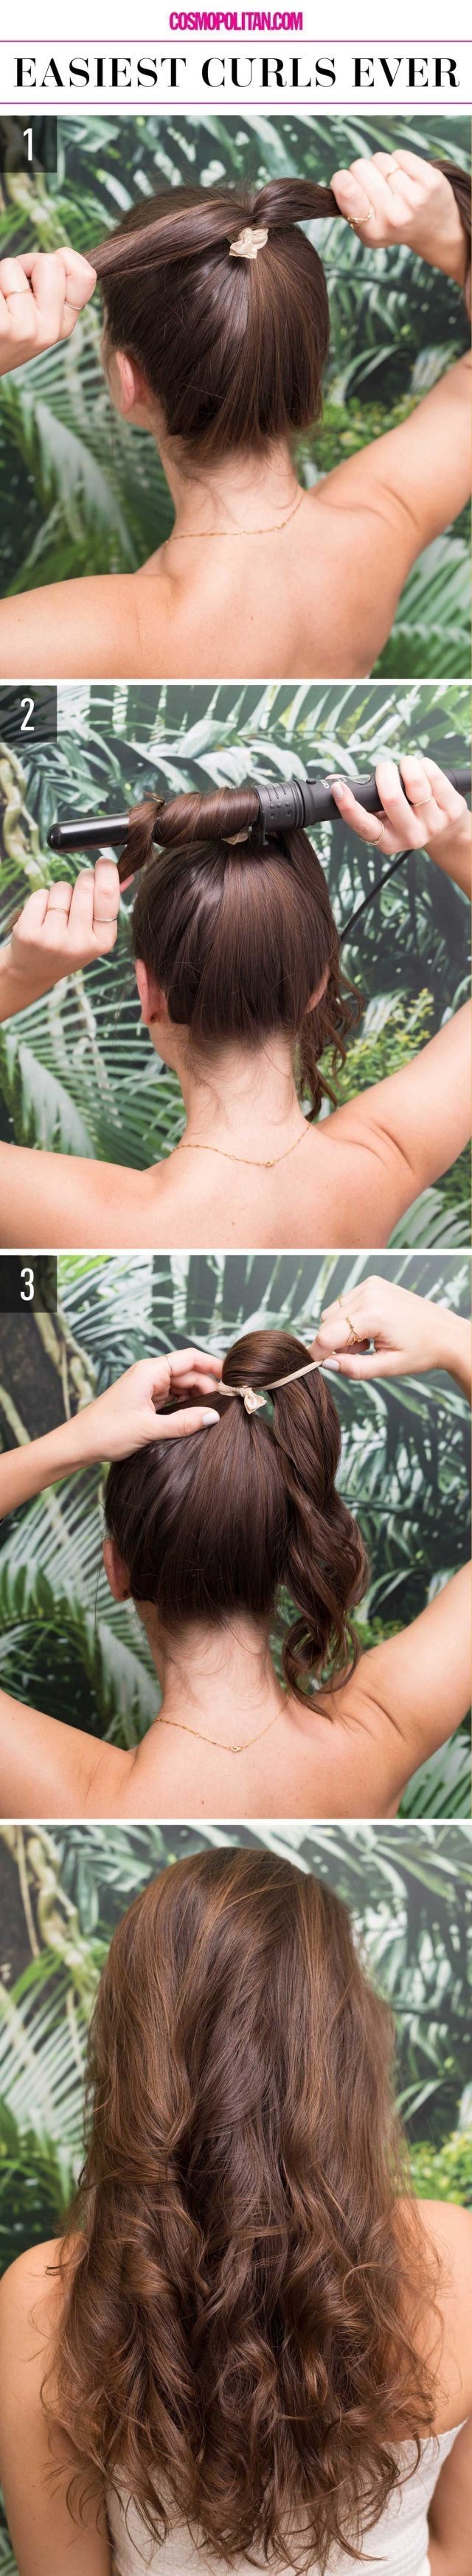 The fastest and easiest way to curl your hair.